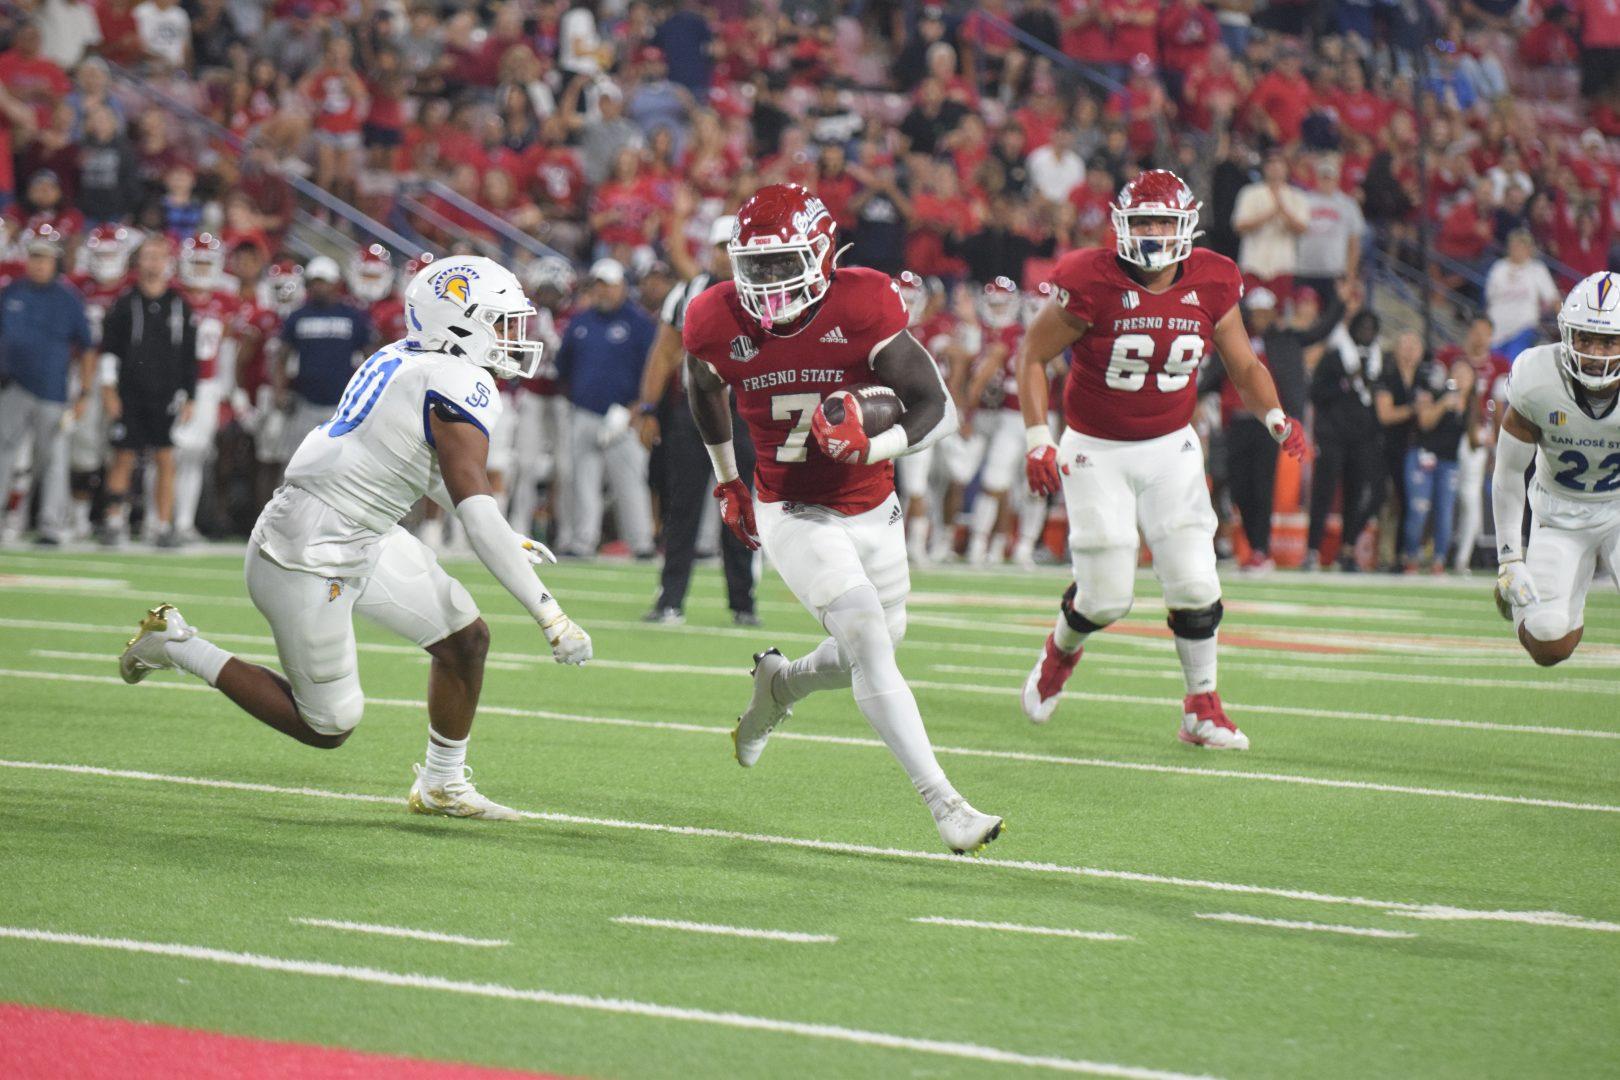 Jordan Mims (7) makes the first touchdown of the evening in the game against San Jose State at Valley Childrens Stadium. (Aidan Garaygordobil/ The Collegian) 